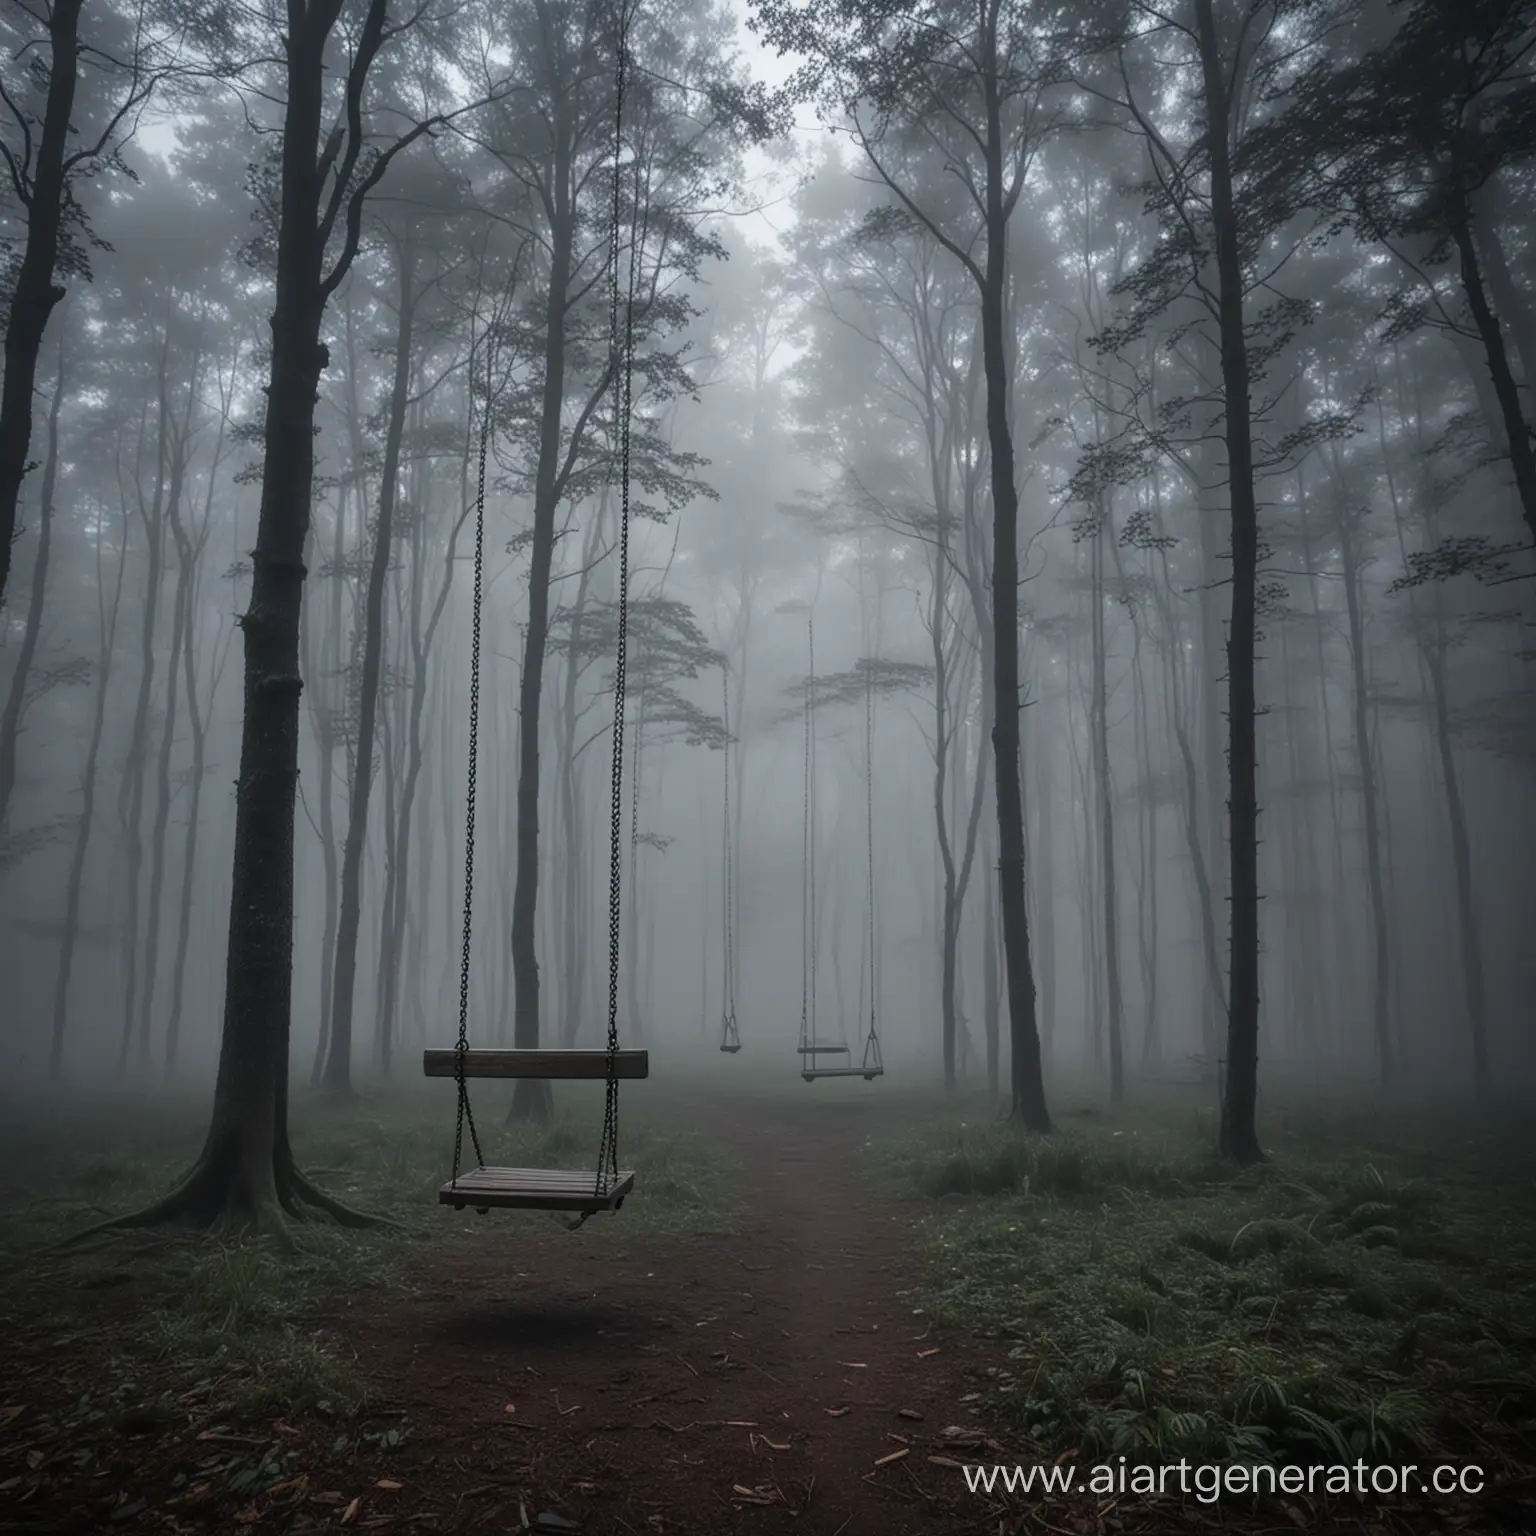 Solitary-Swings-Amidst-Enigmatic-Forest-Mist